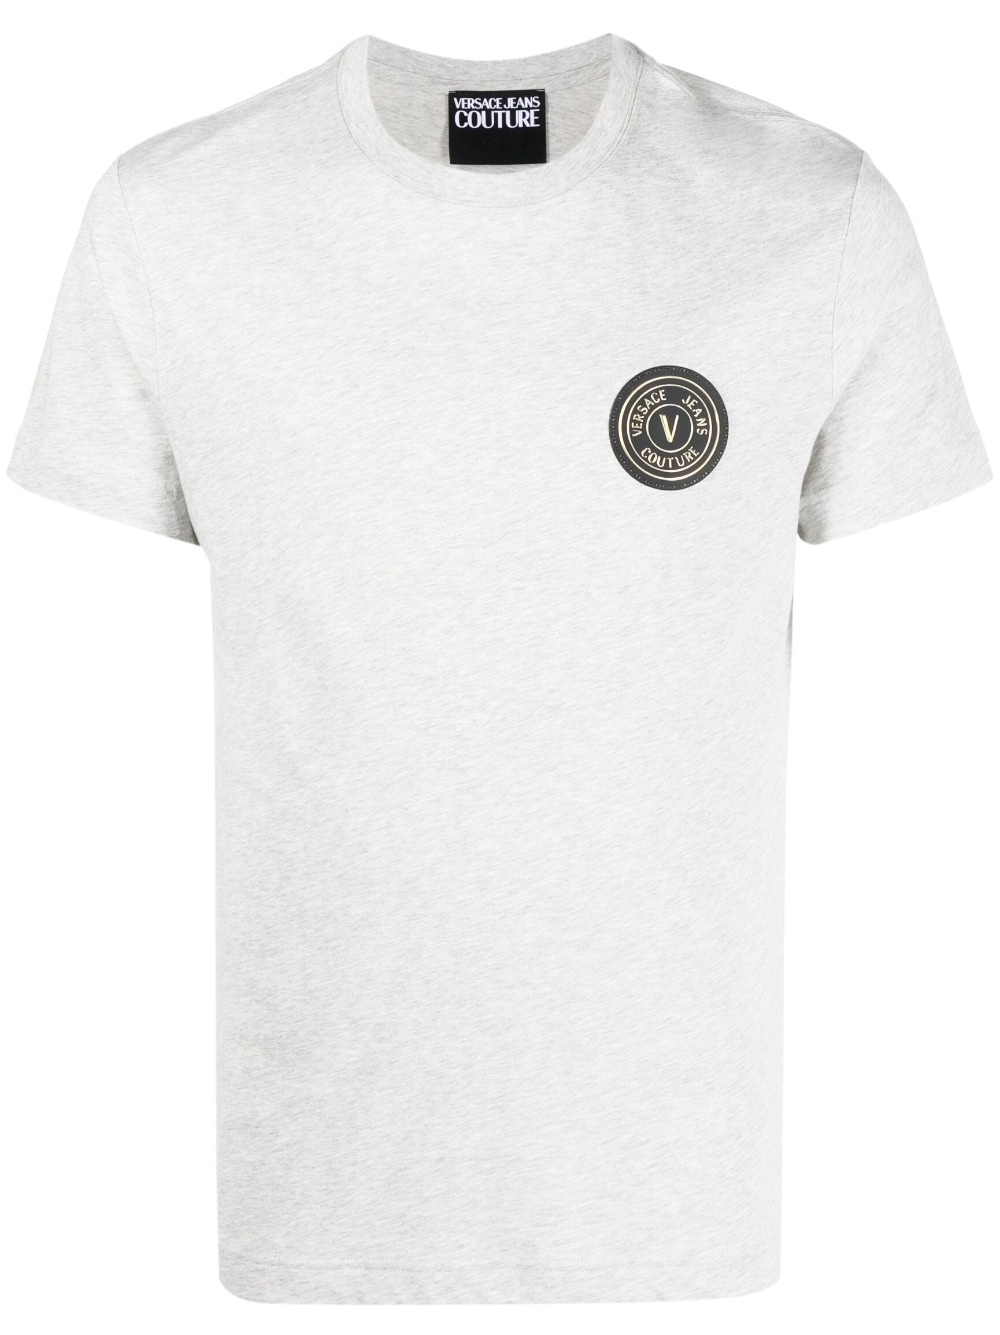 Versace Jeans Couture logo-patch T-shirt - Grey